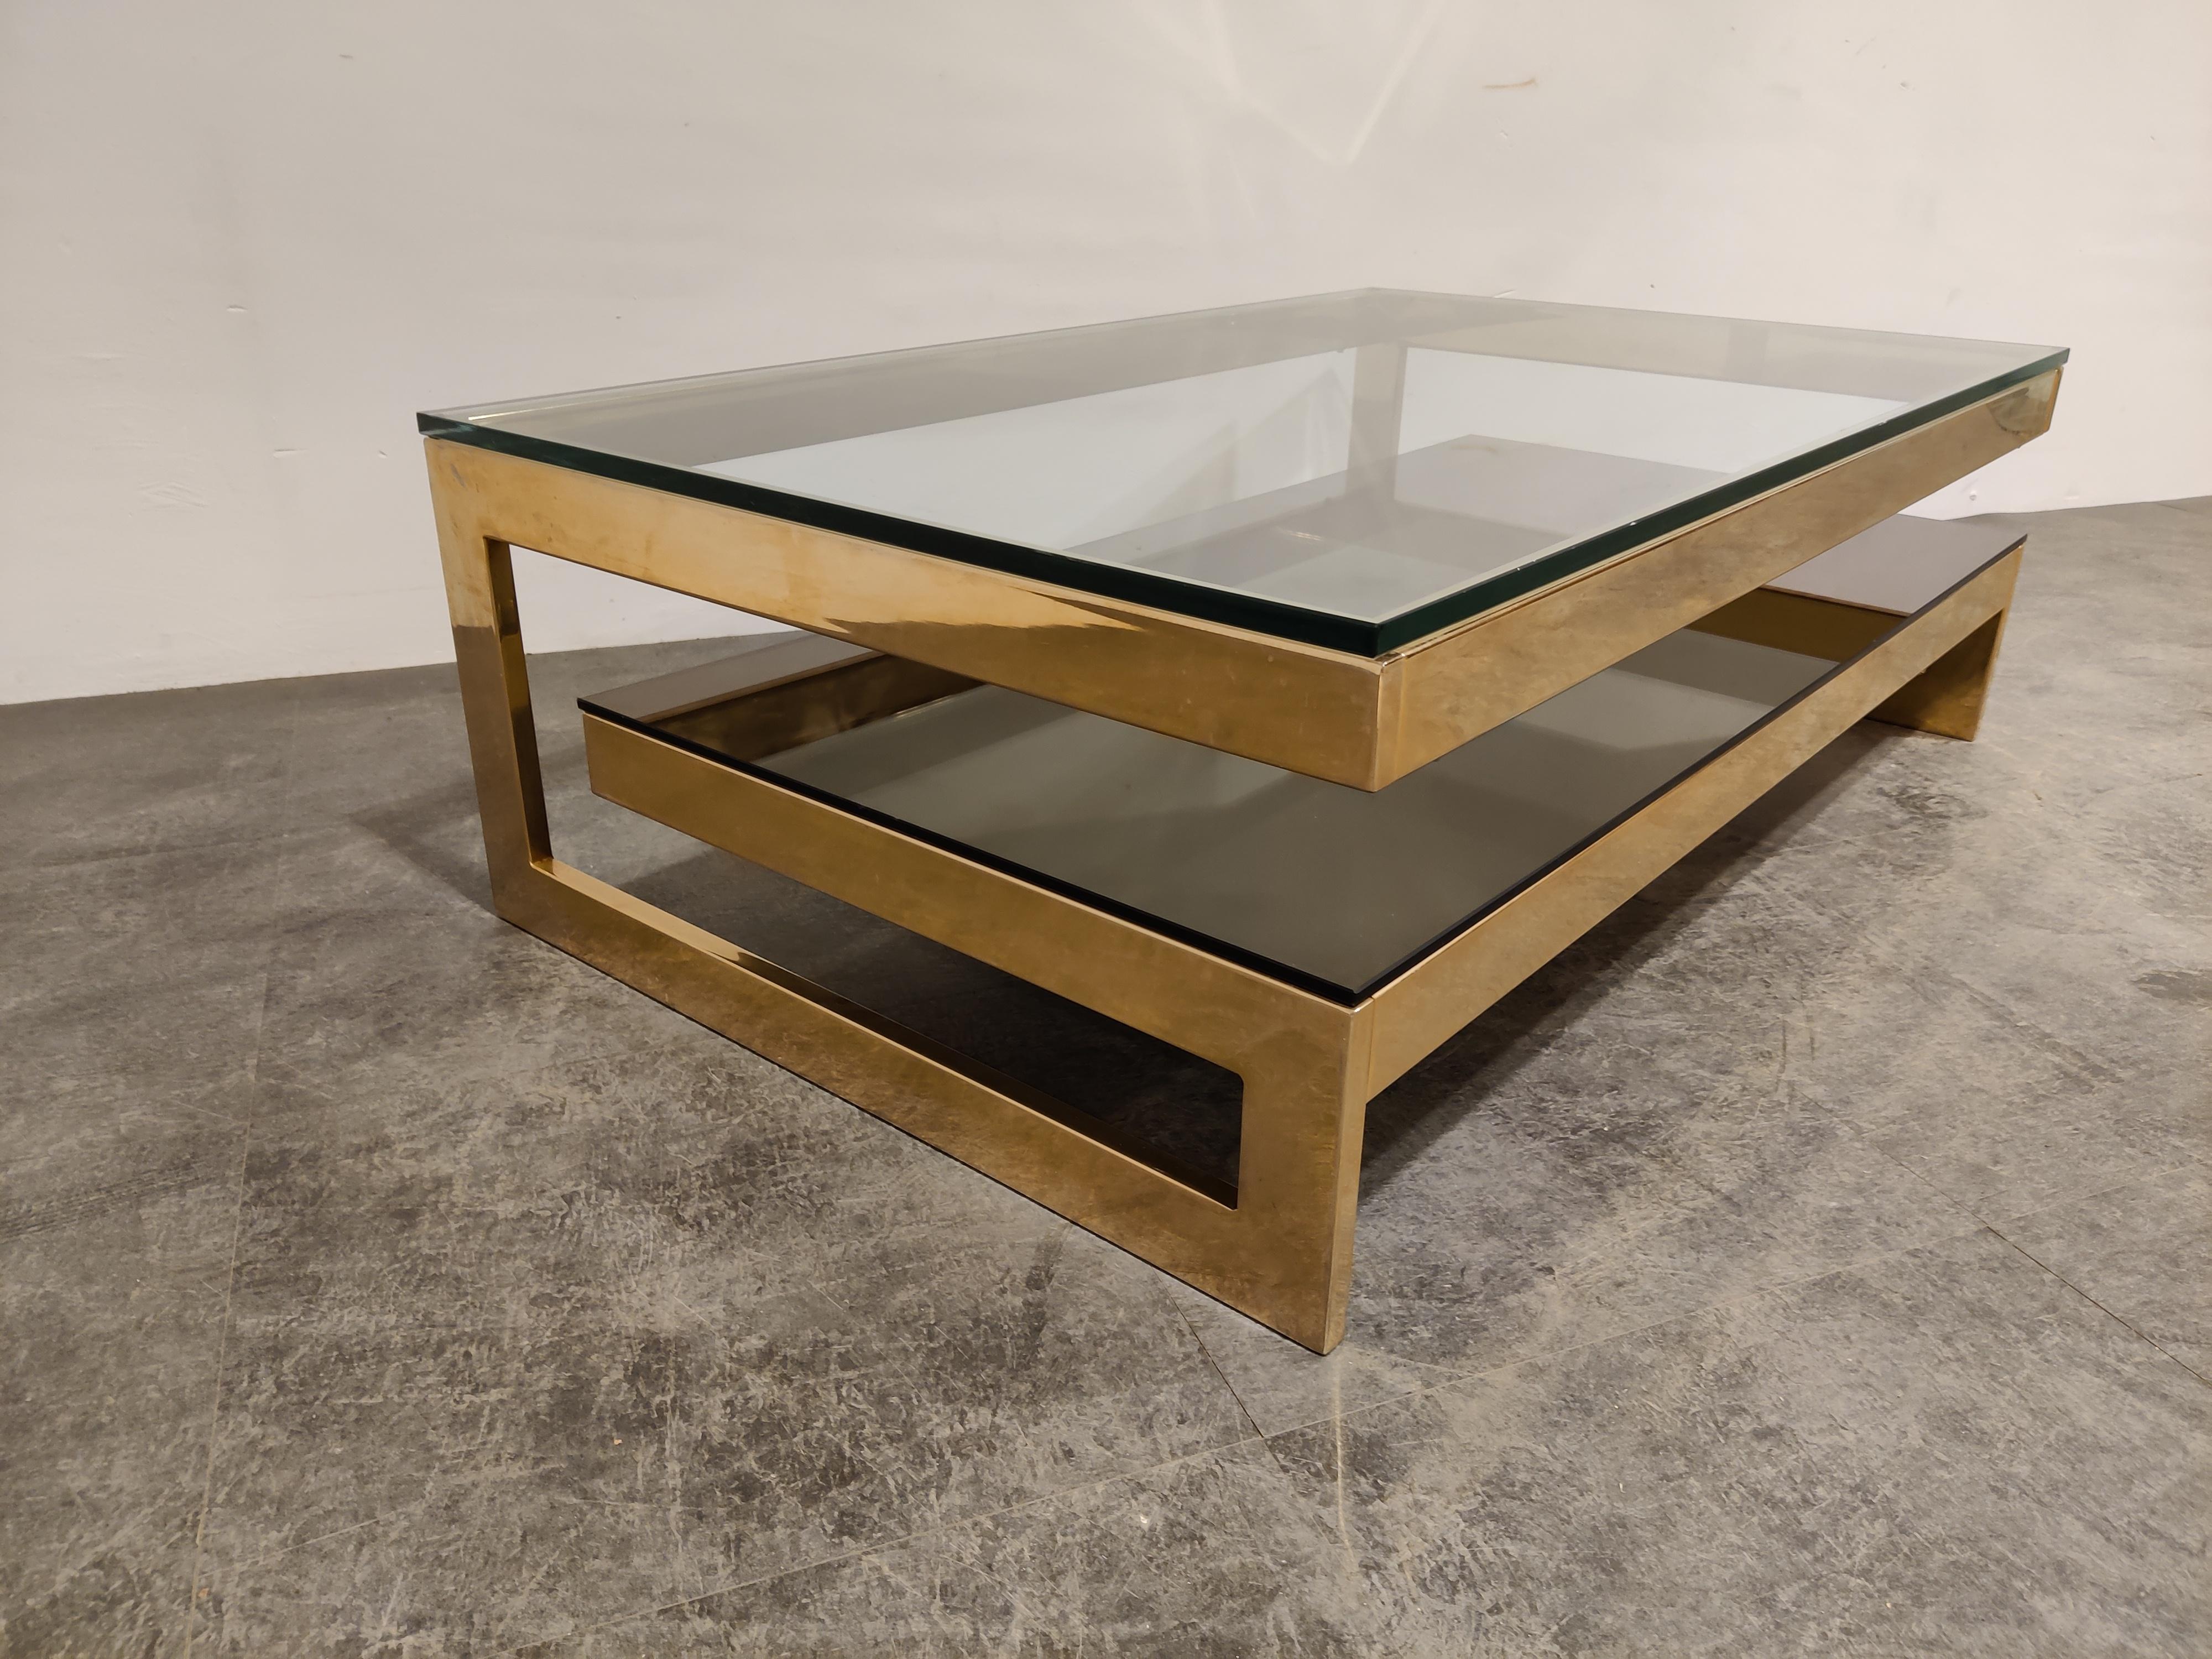 Quality 23-karat gold layered and thick clear glass two-tier coffee table manufactured by Belgochrom.

This table is a popular model and is referred to as the 'G' model

Belgochrom produced quality furniture pieces with a luxurious